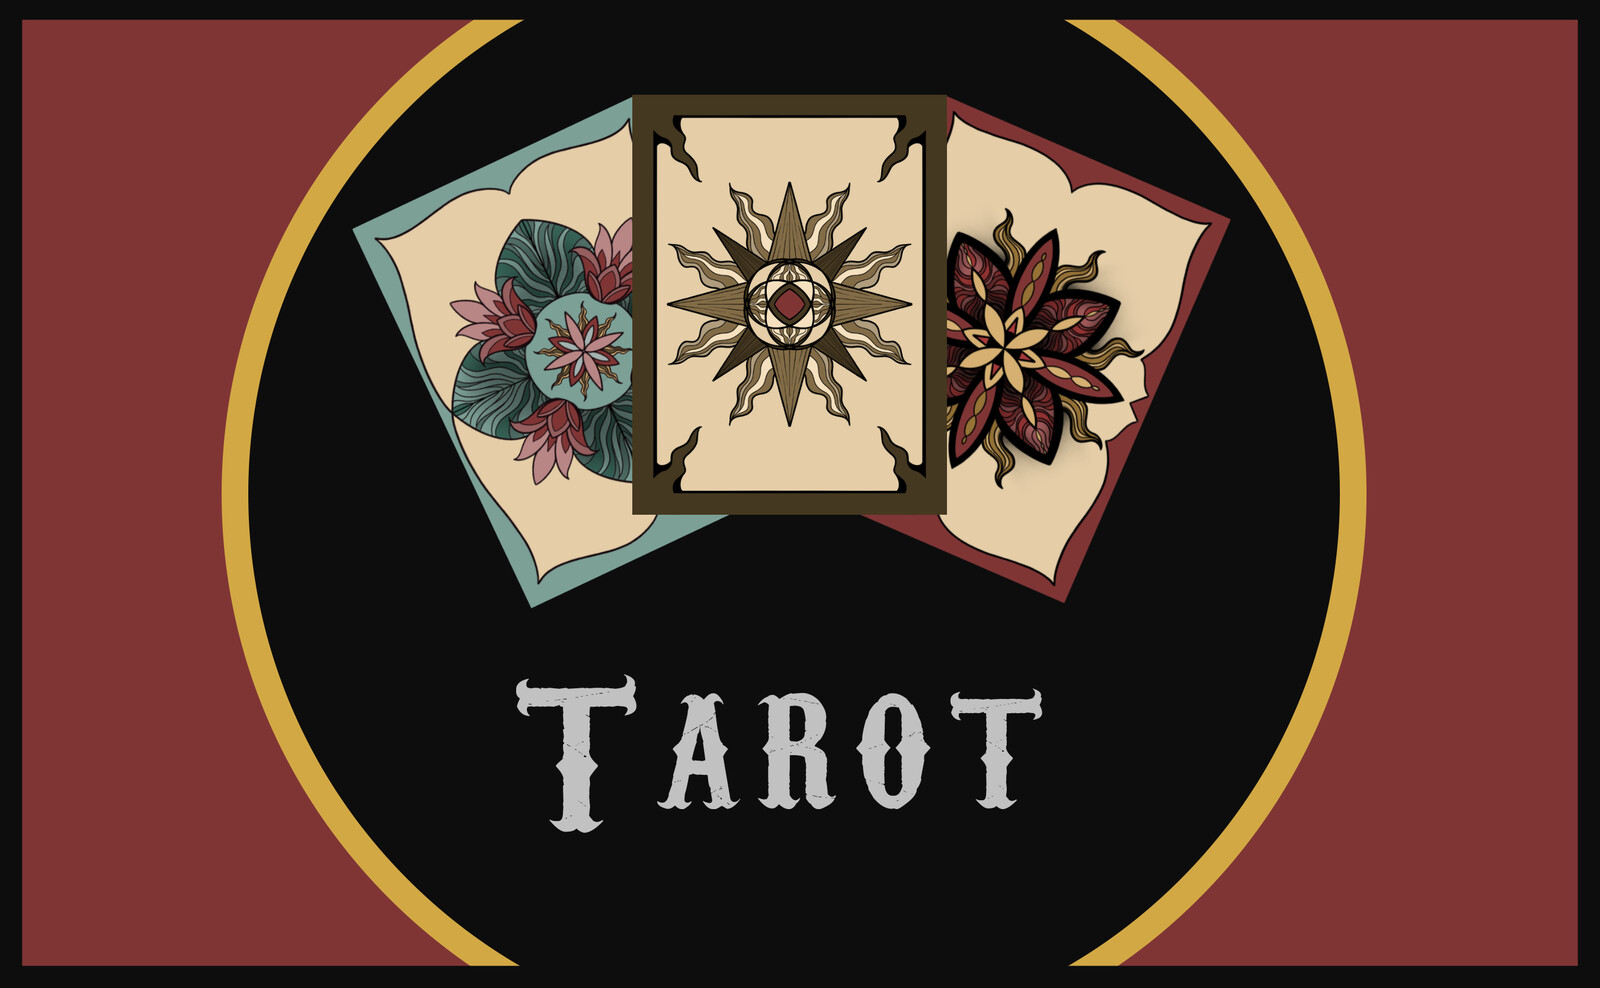 Cards designed in Procreate.
Final signs created in Photoshop.
Font downloaded (for personal use) from daFont